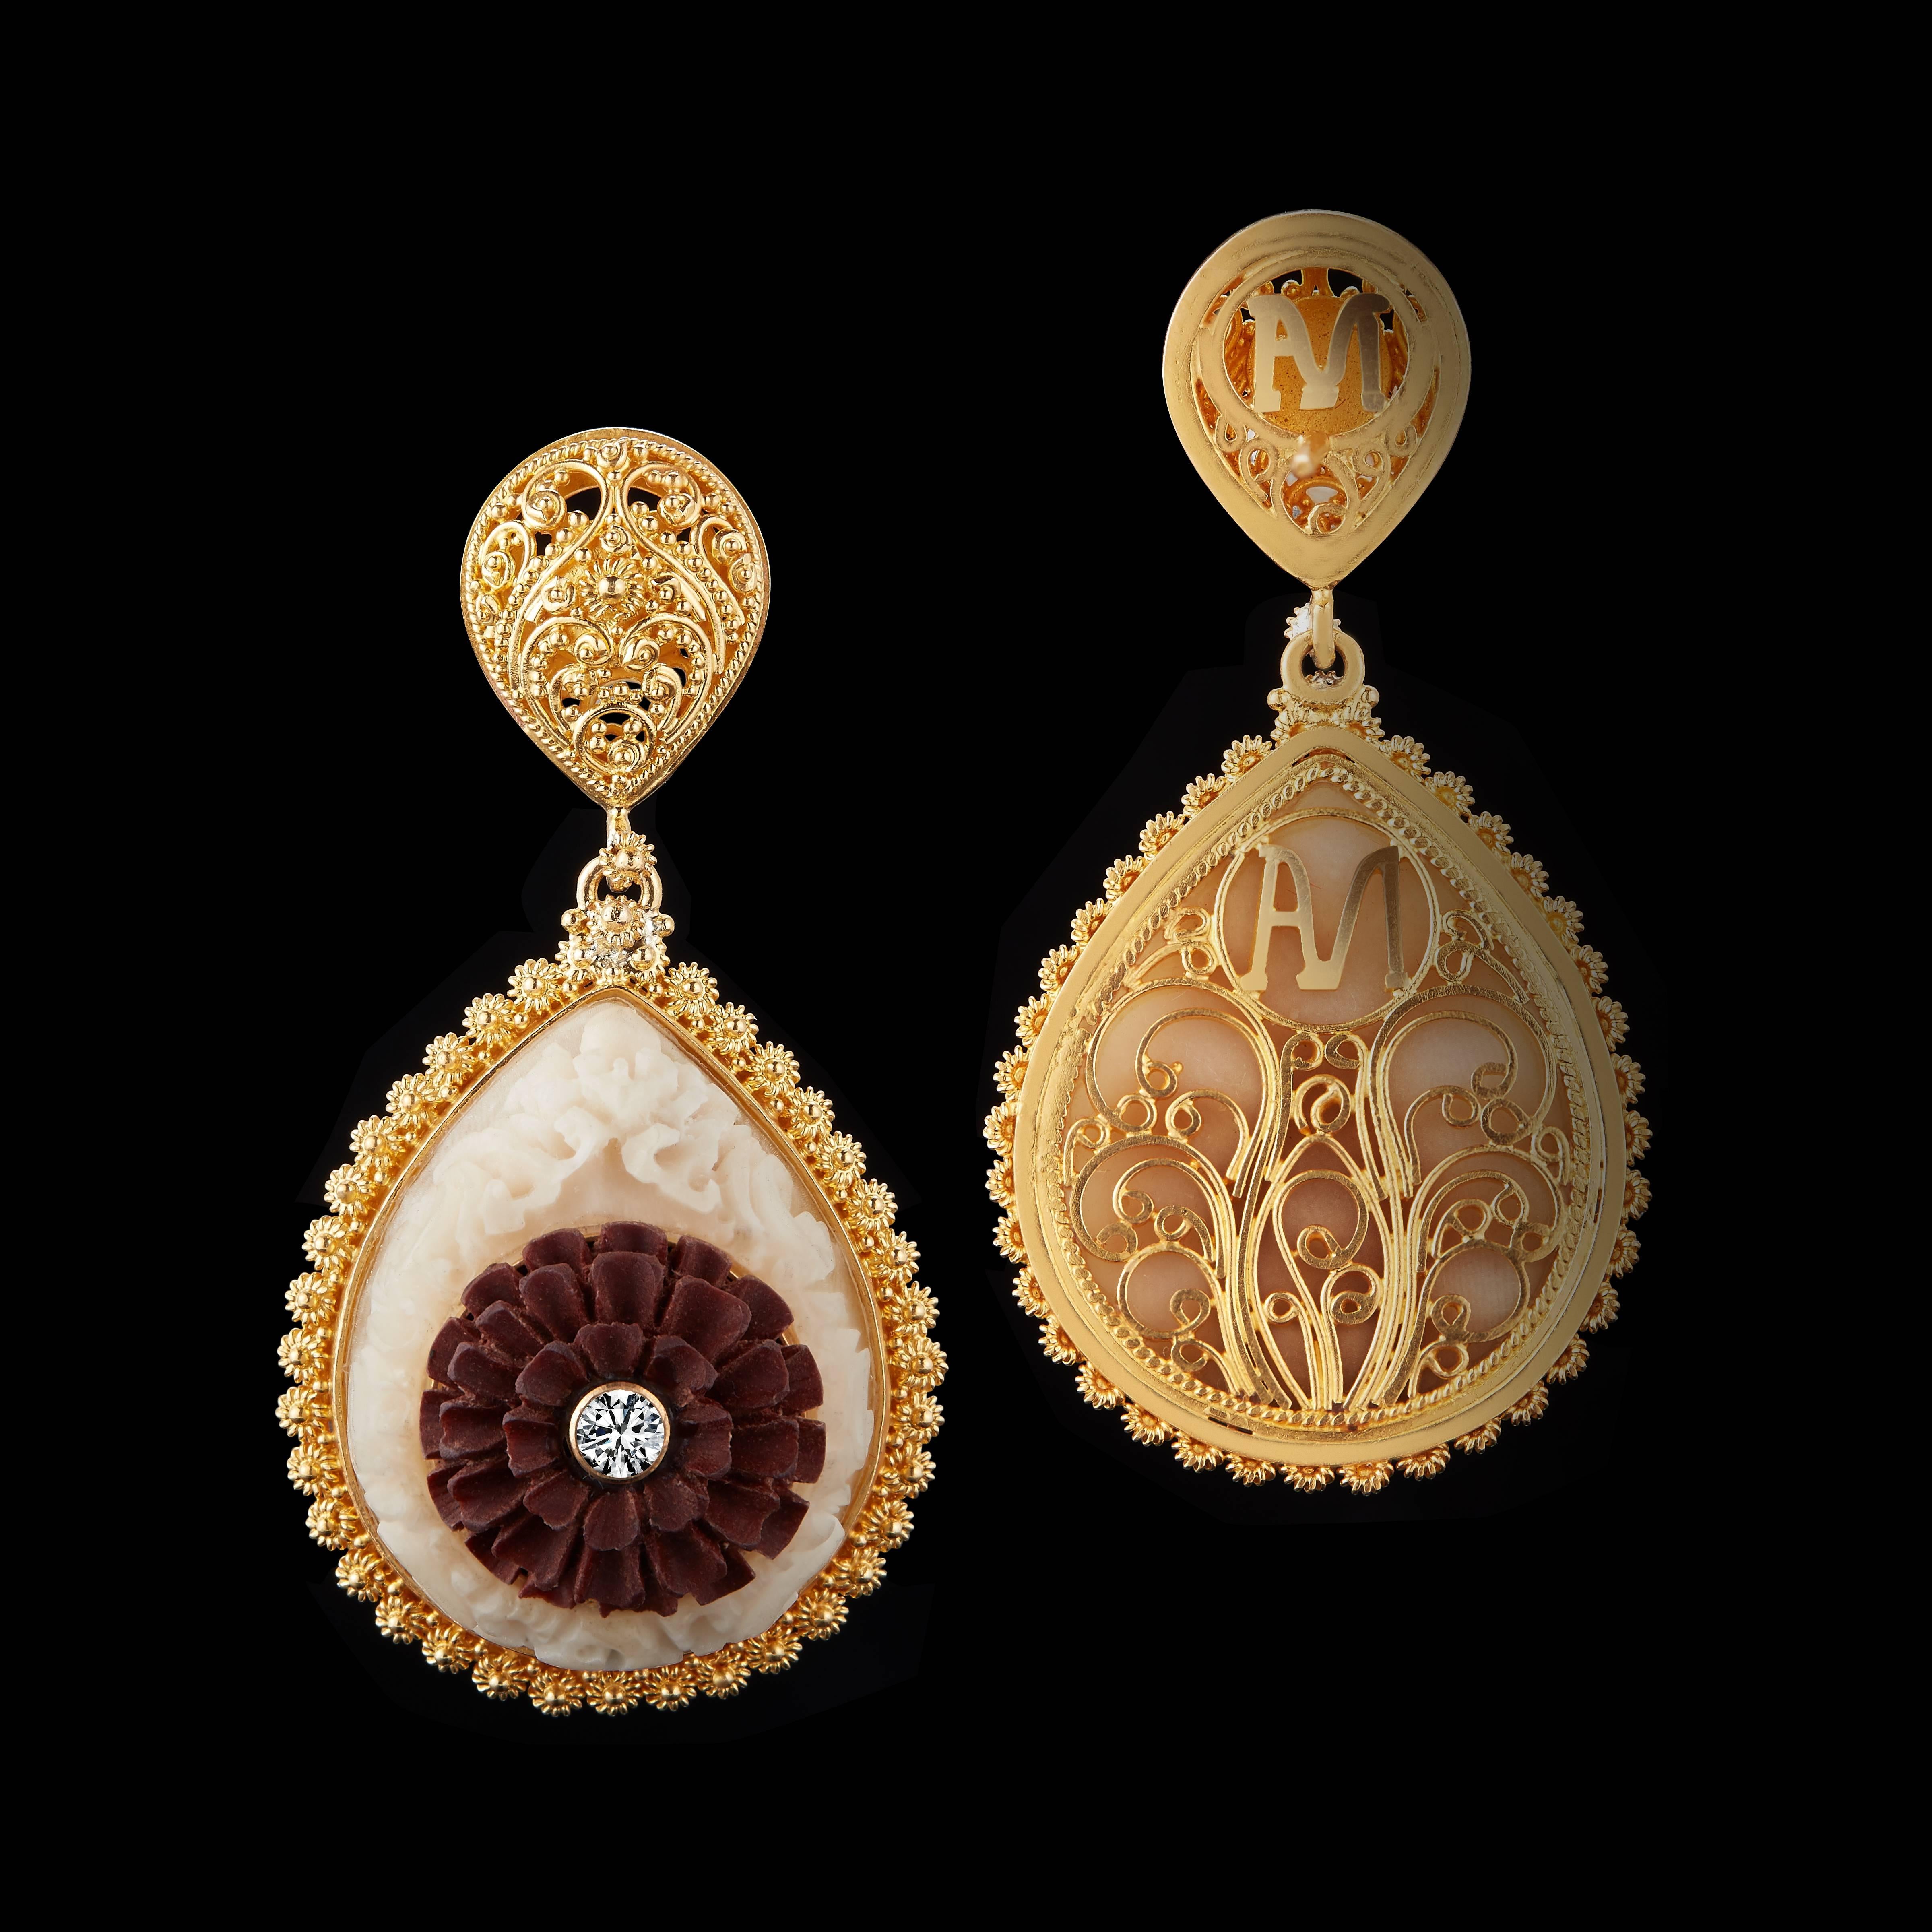 These teardrop earrings feature Balinese design motifs of the Kayonan, or Tree of Life, in carved Tagua and Lotus flowers in carved Sawo wood, accented by two Brilliant-cut Diamonds weighing .11 carats total. Prolific carvings in 22 karat yellow are